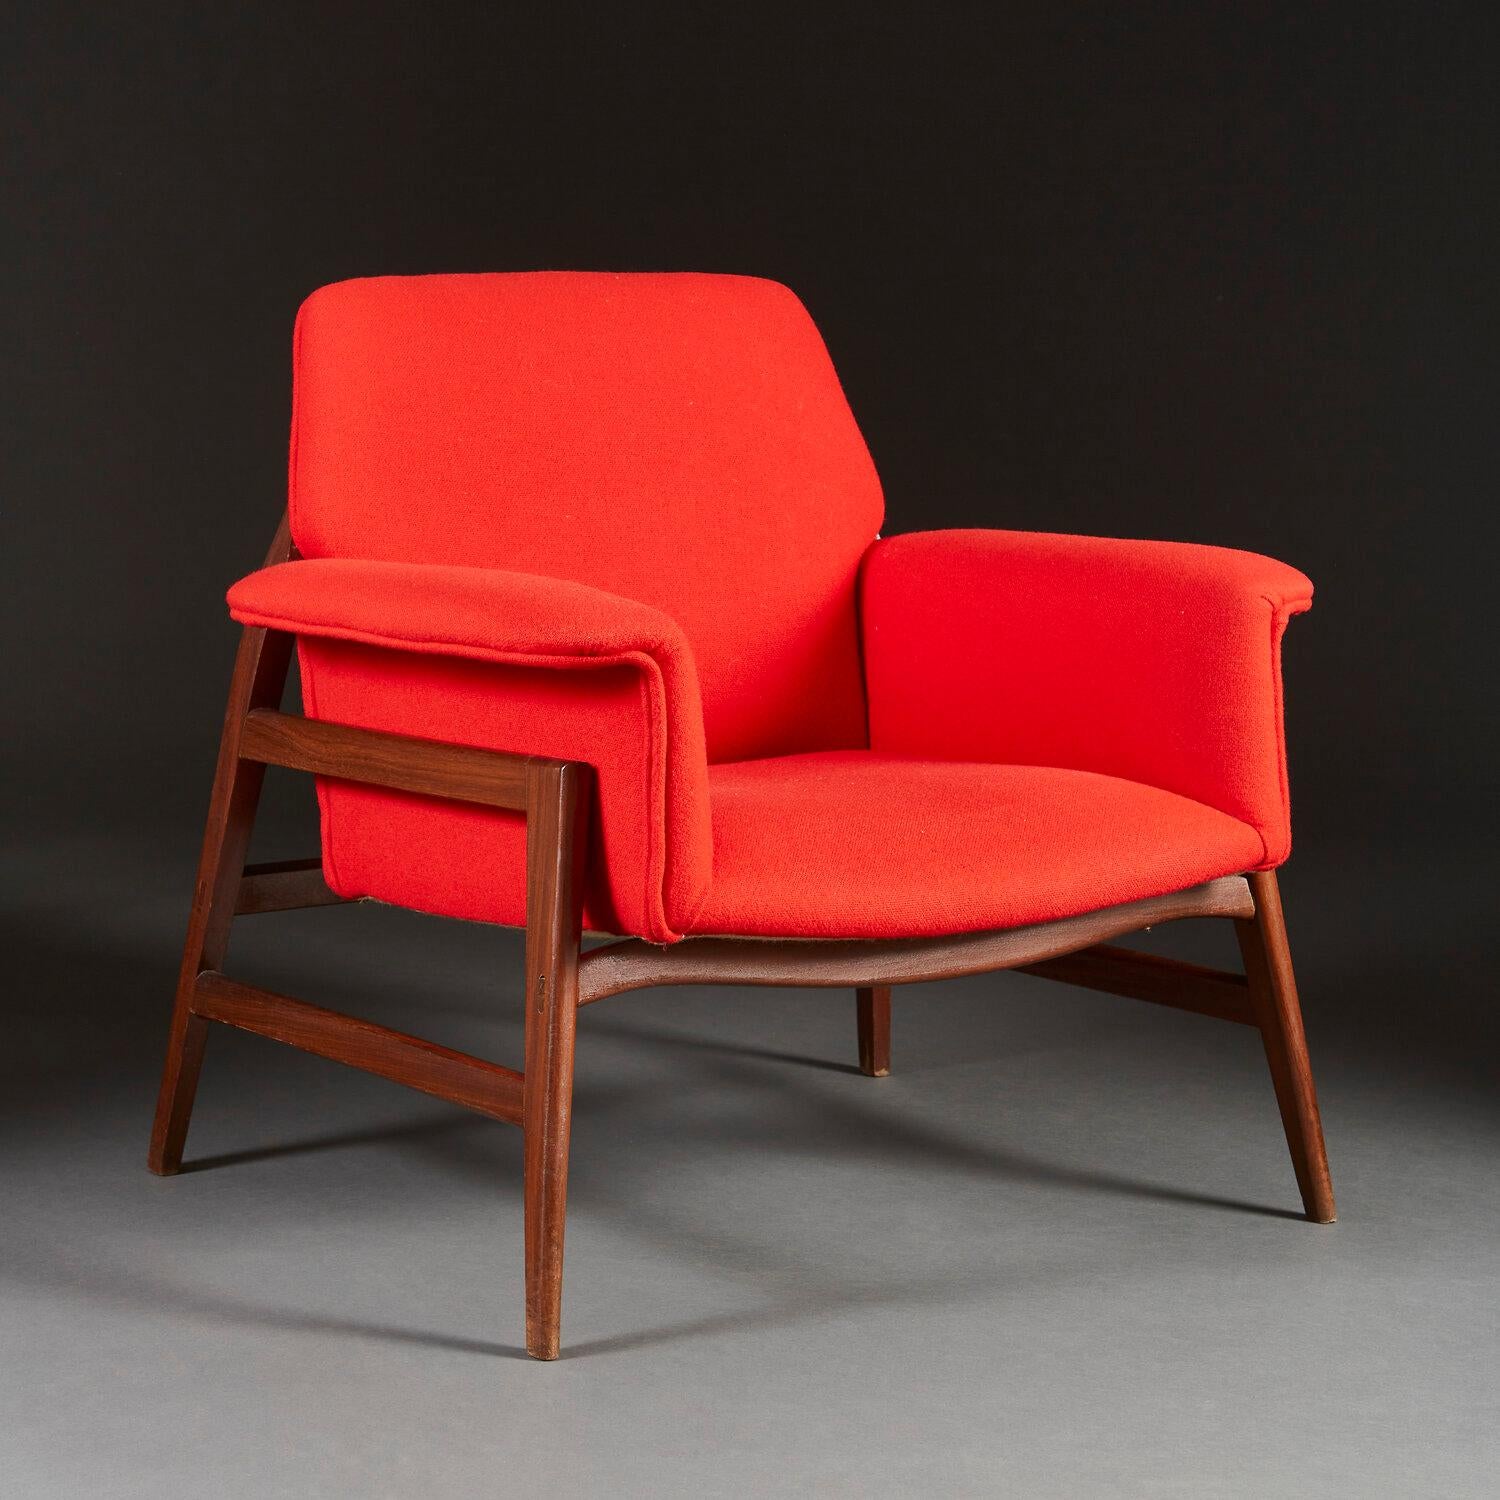 A pair of mid twentieth century Italian armchairs with outswept arms, the seat and back upholstered in a crimson red Danish wool, and supported on a teak wood base with tapering legs.